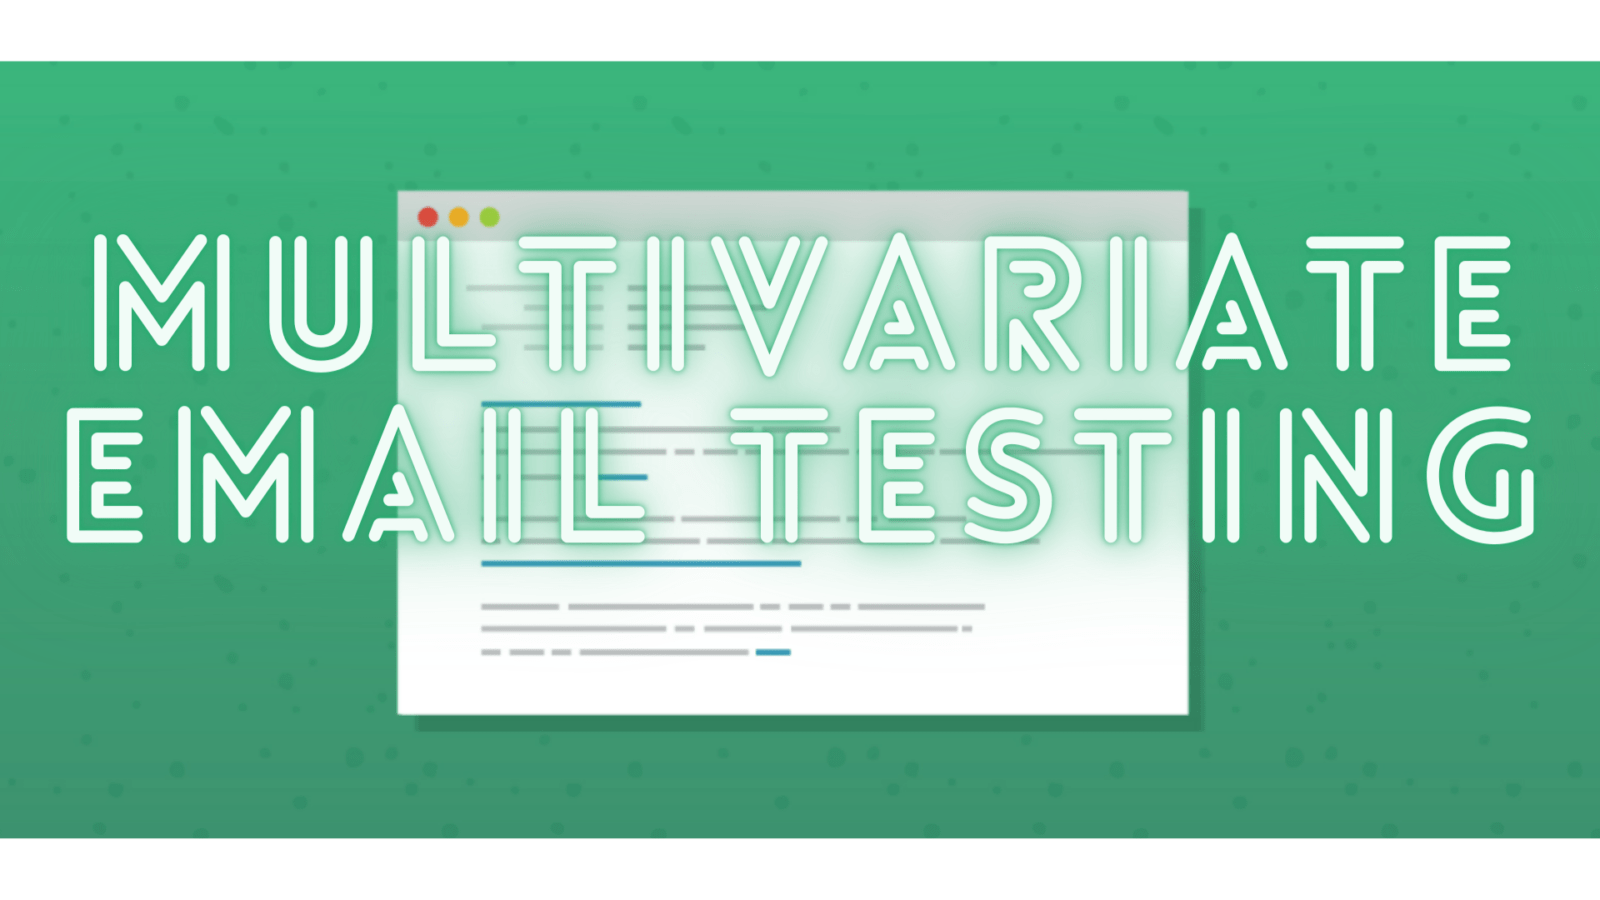 Multivariant testing in emails